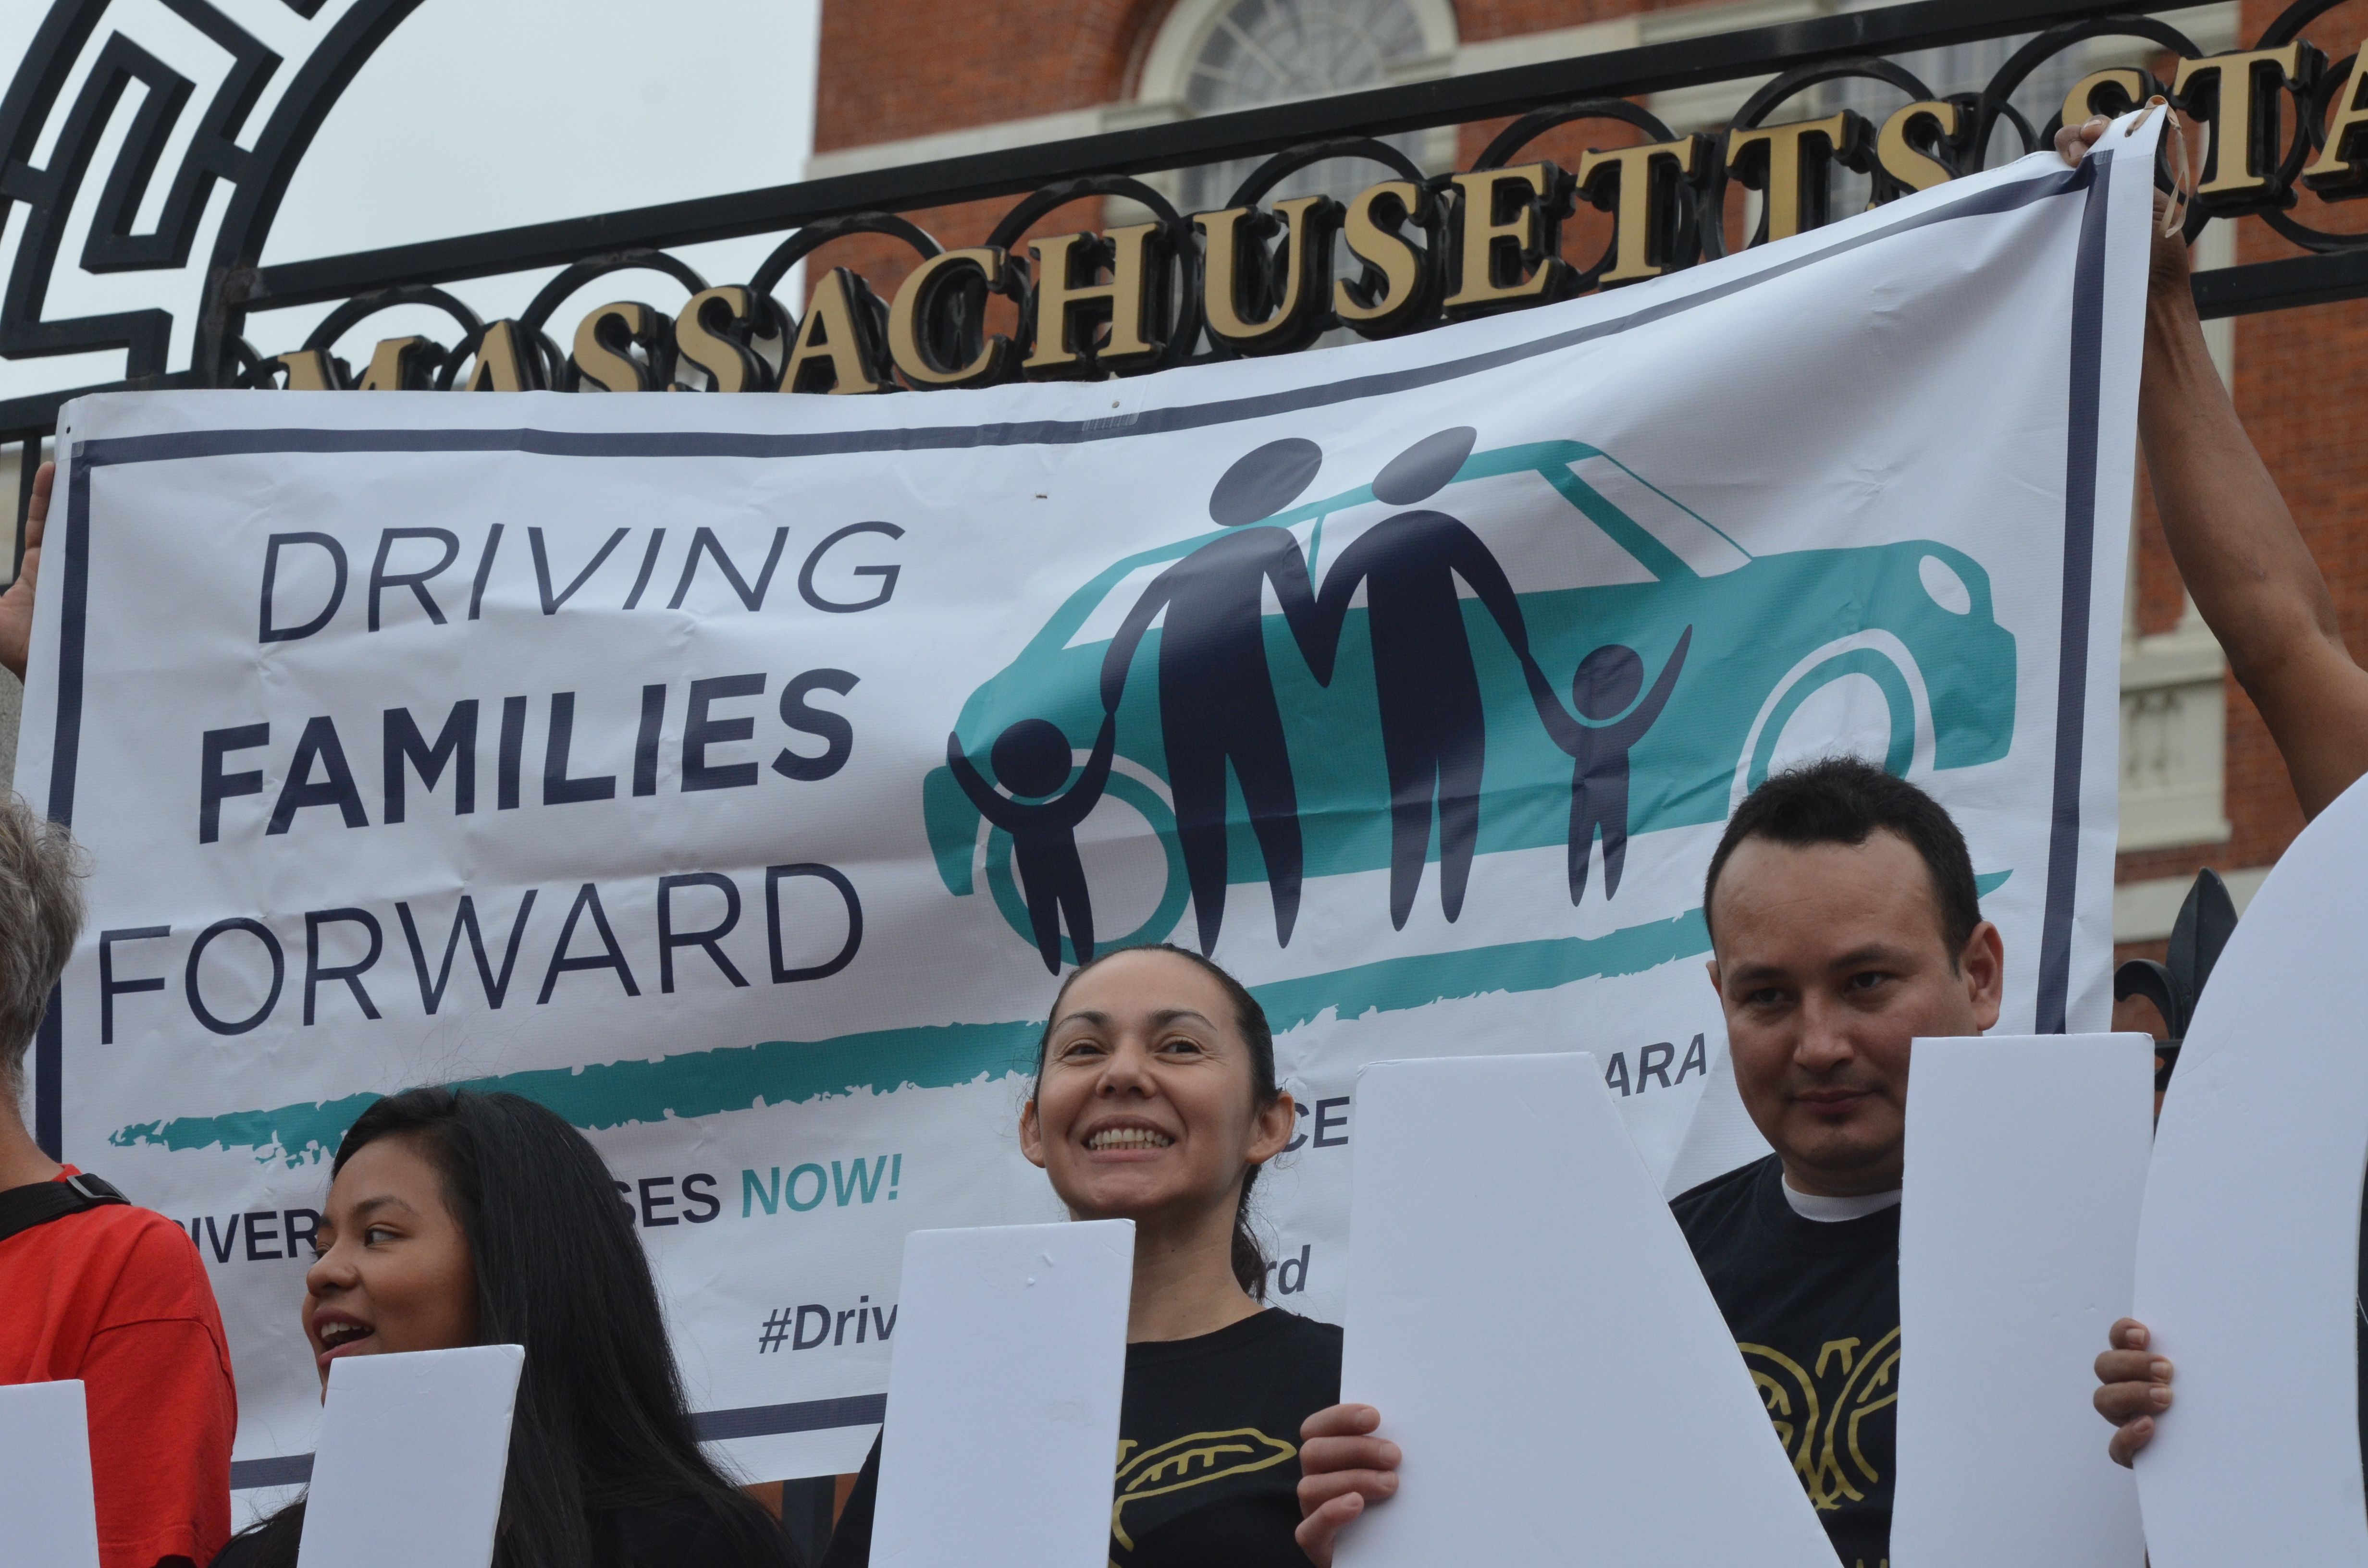 Massachusetts RMV holds hearing on regulations for undocumented immigrants  to get driver's licenses